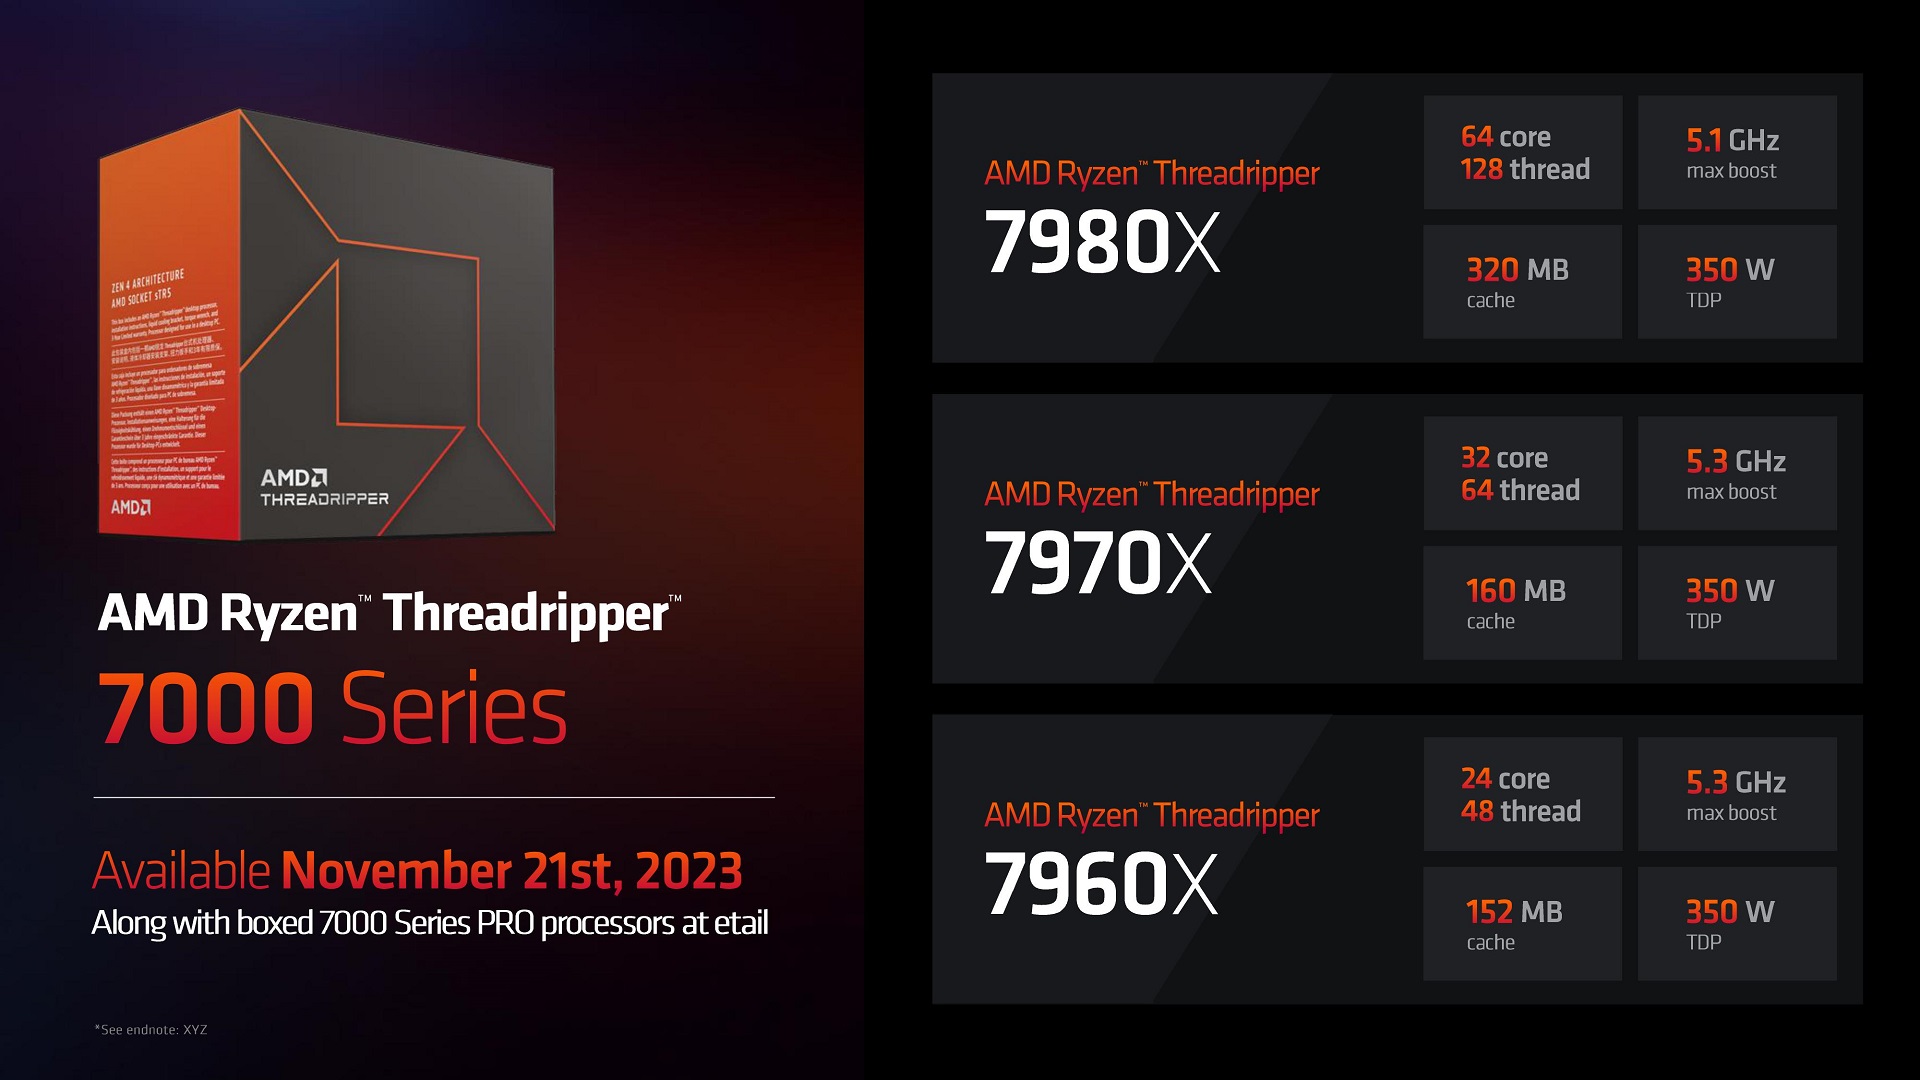 AMD Threadripper PRO 5000 WX-Series Content Creation Review